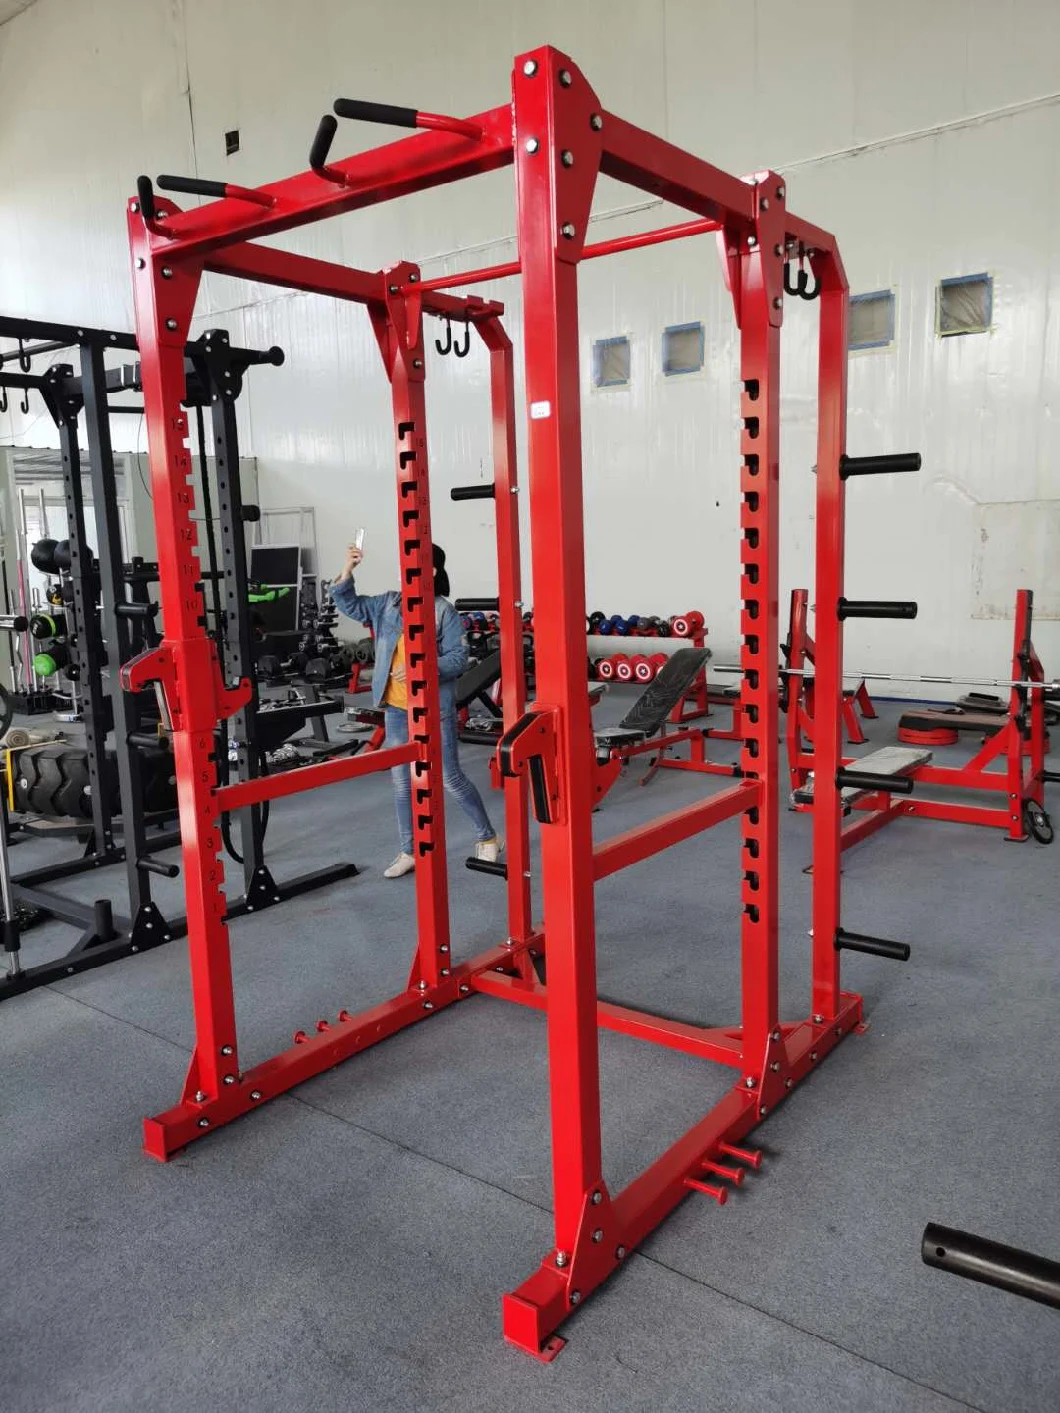 Hot Sale 2020 Commercial Gym Strength Freedom 3D Smith Machine Fitness Equipment for Club Use